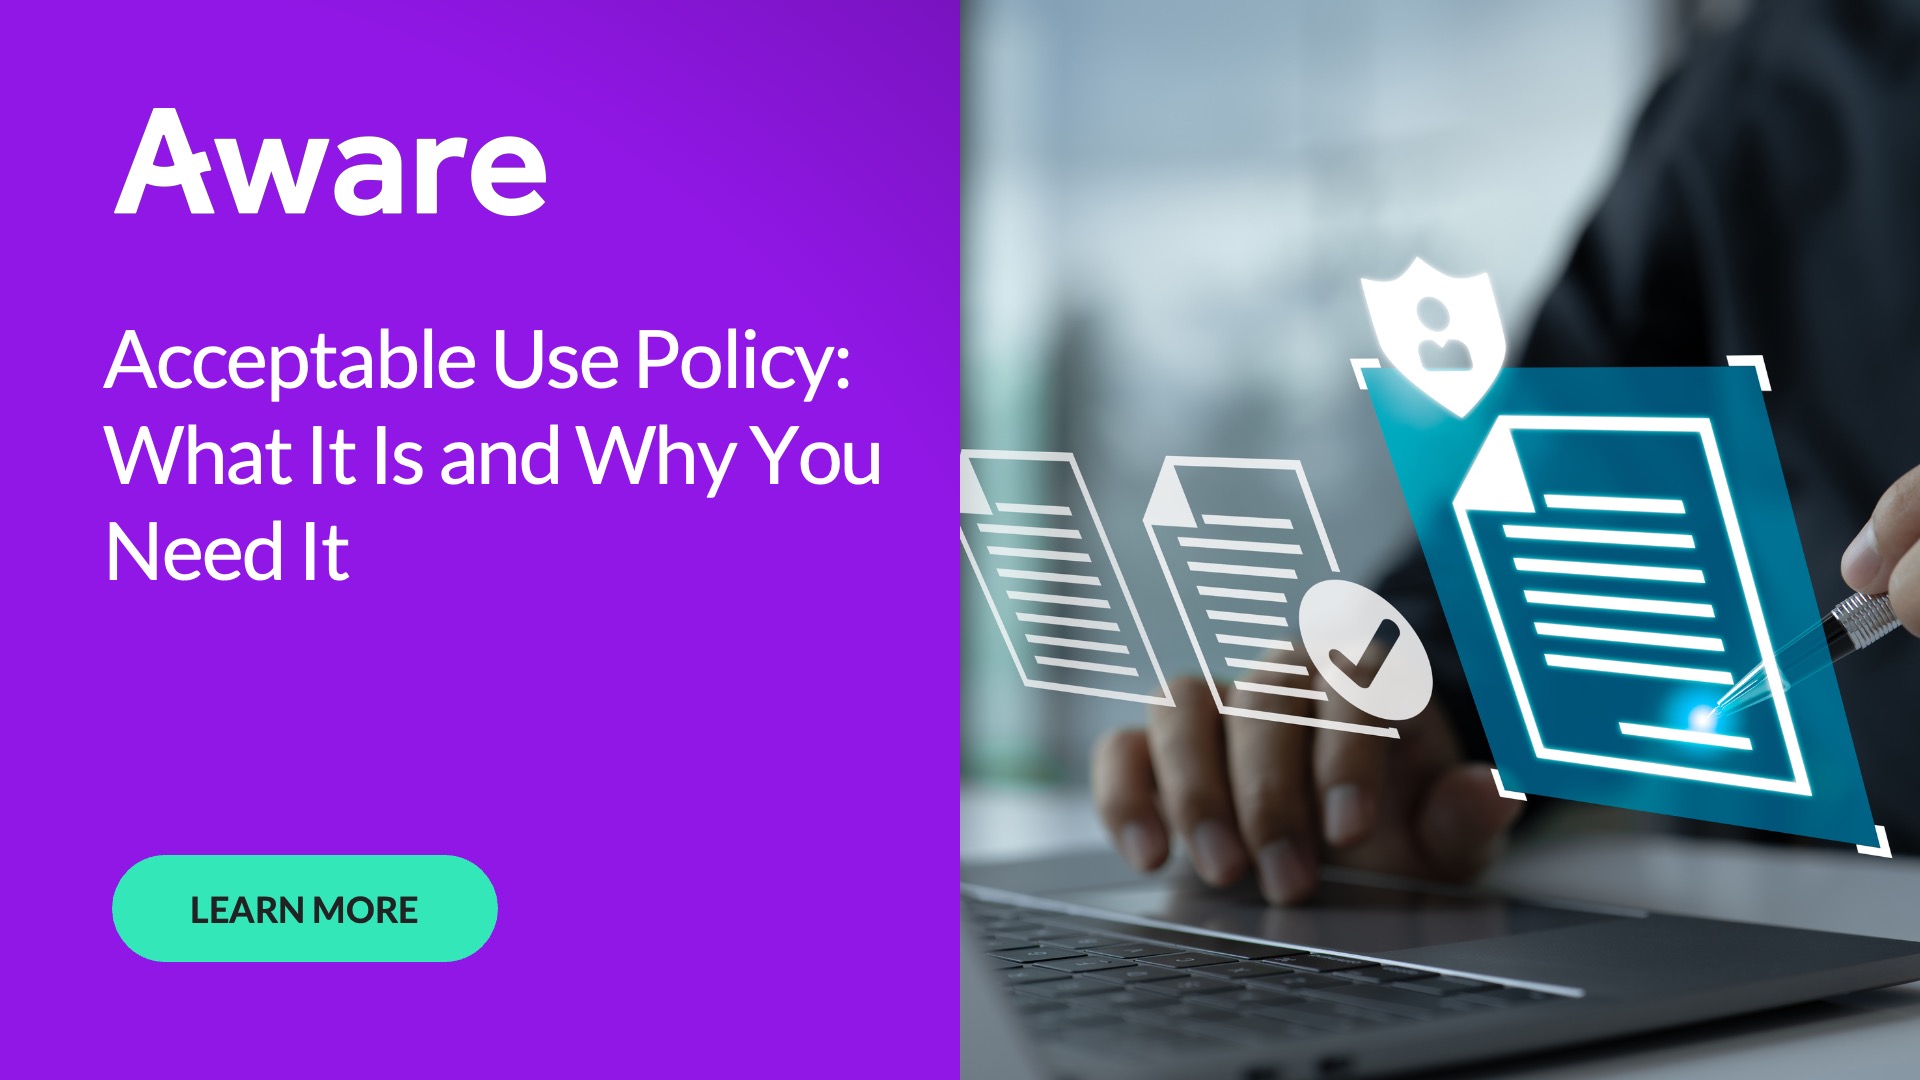 Acceptable Use Policy: What It Is and Why You Need It